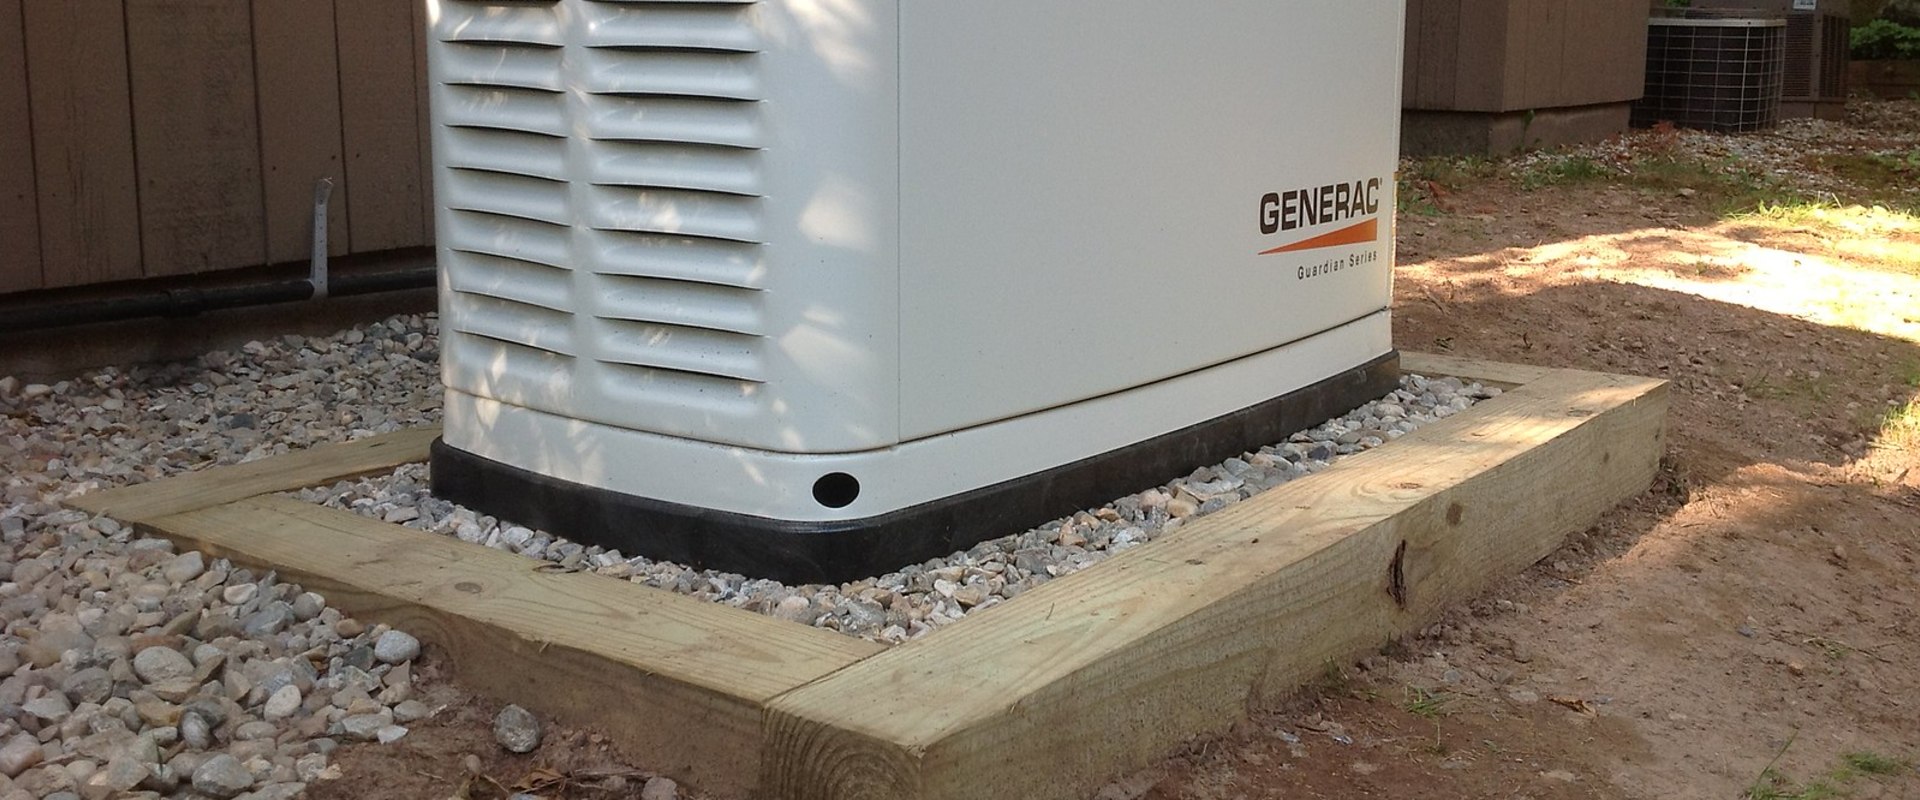 Roof Installation And Backup Generator For Alabama Weather